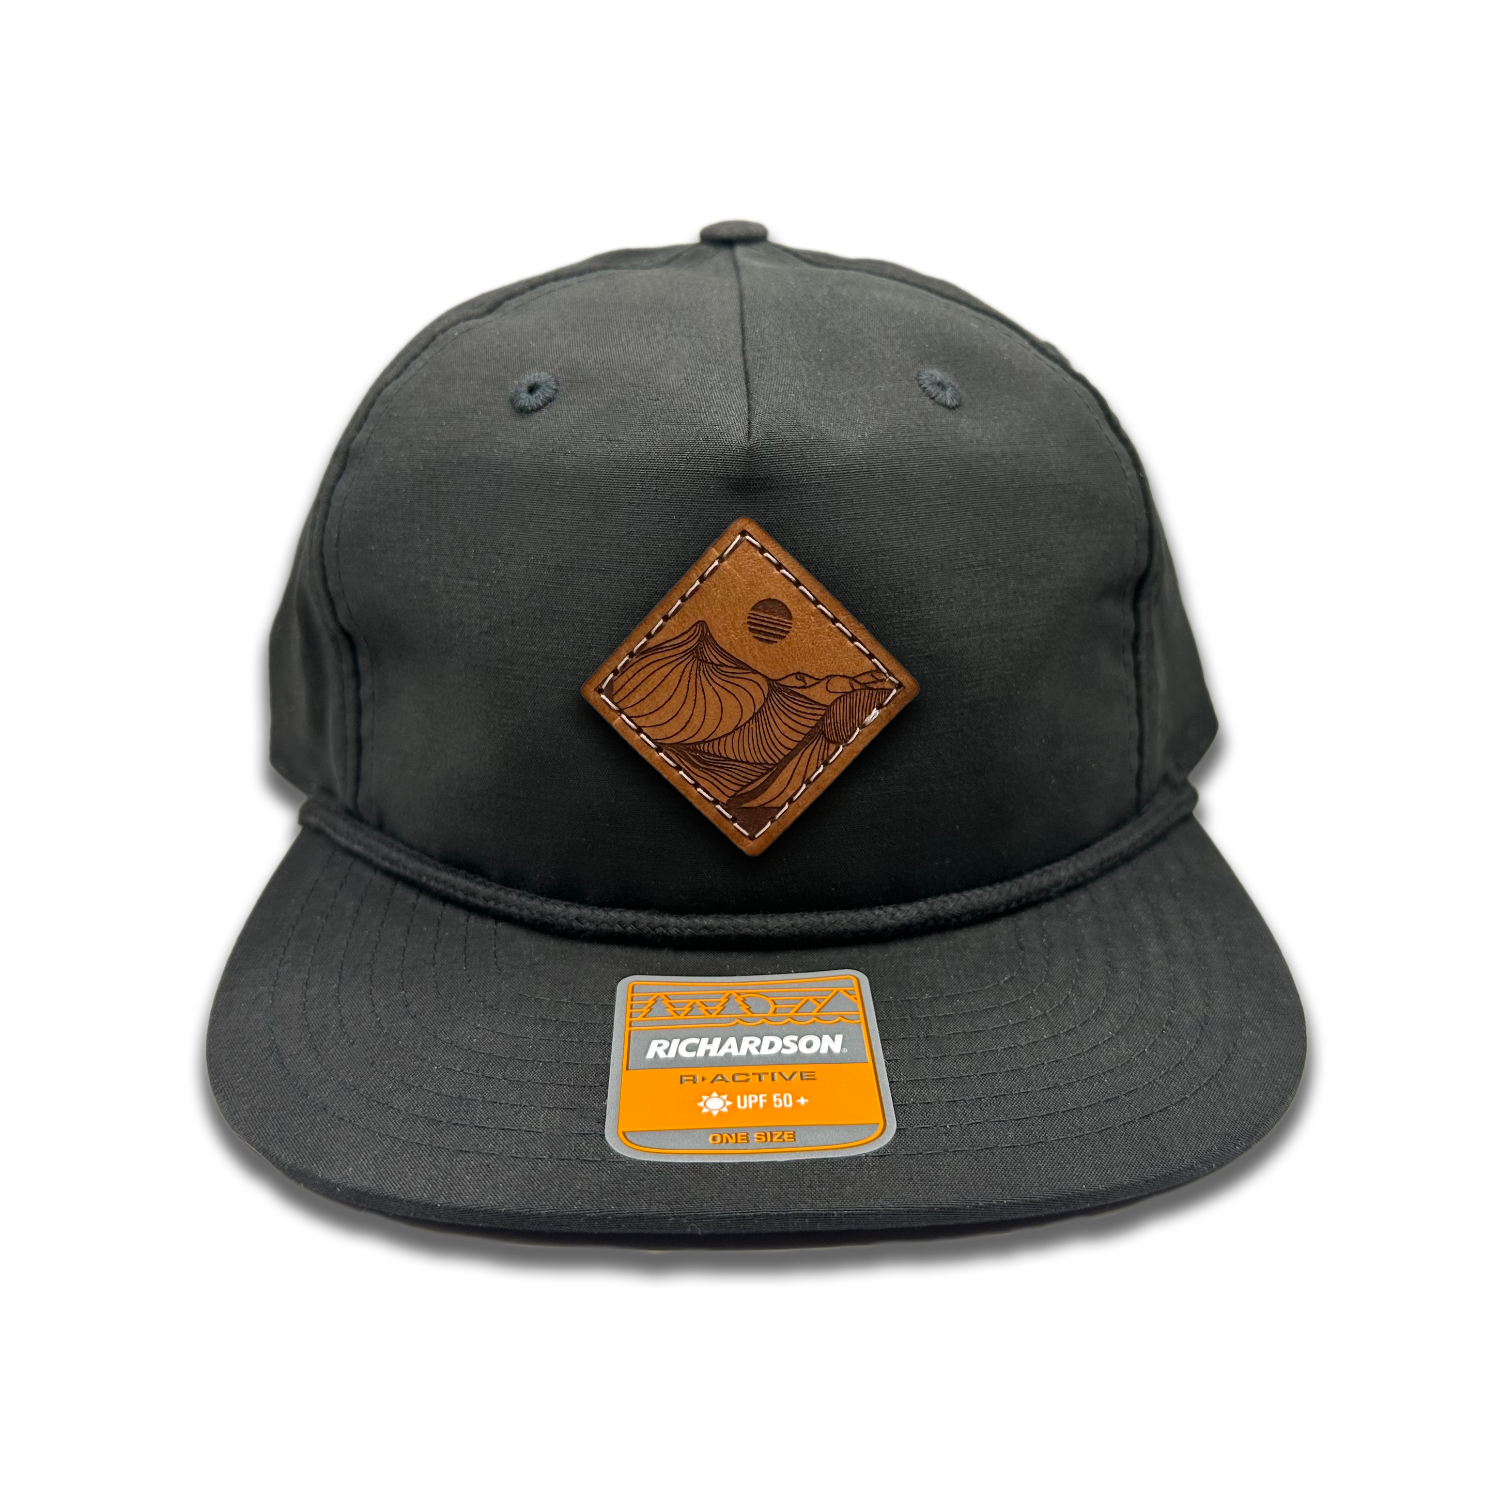 Add a touch of rugged charm to your look with the Black Richardson 256 Rope Umpqua Hat. Made in Colorado, USA, this low profile SnapBack cap features a Desert Mountain patch design and genuine leather patch sewn on. Stay stylish with its flatbill and lightweight material.